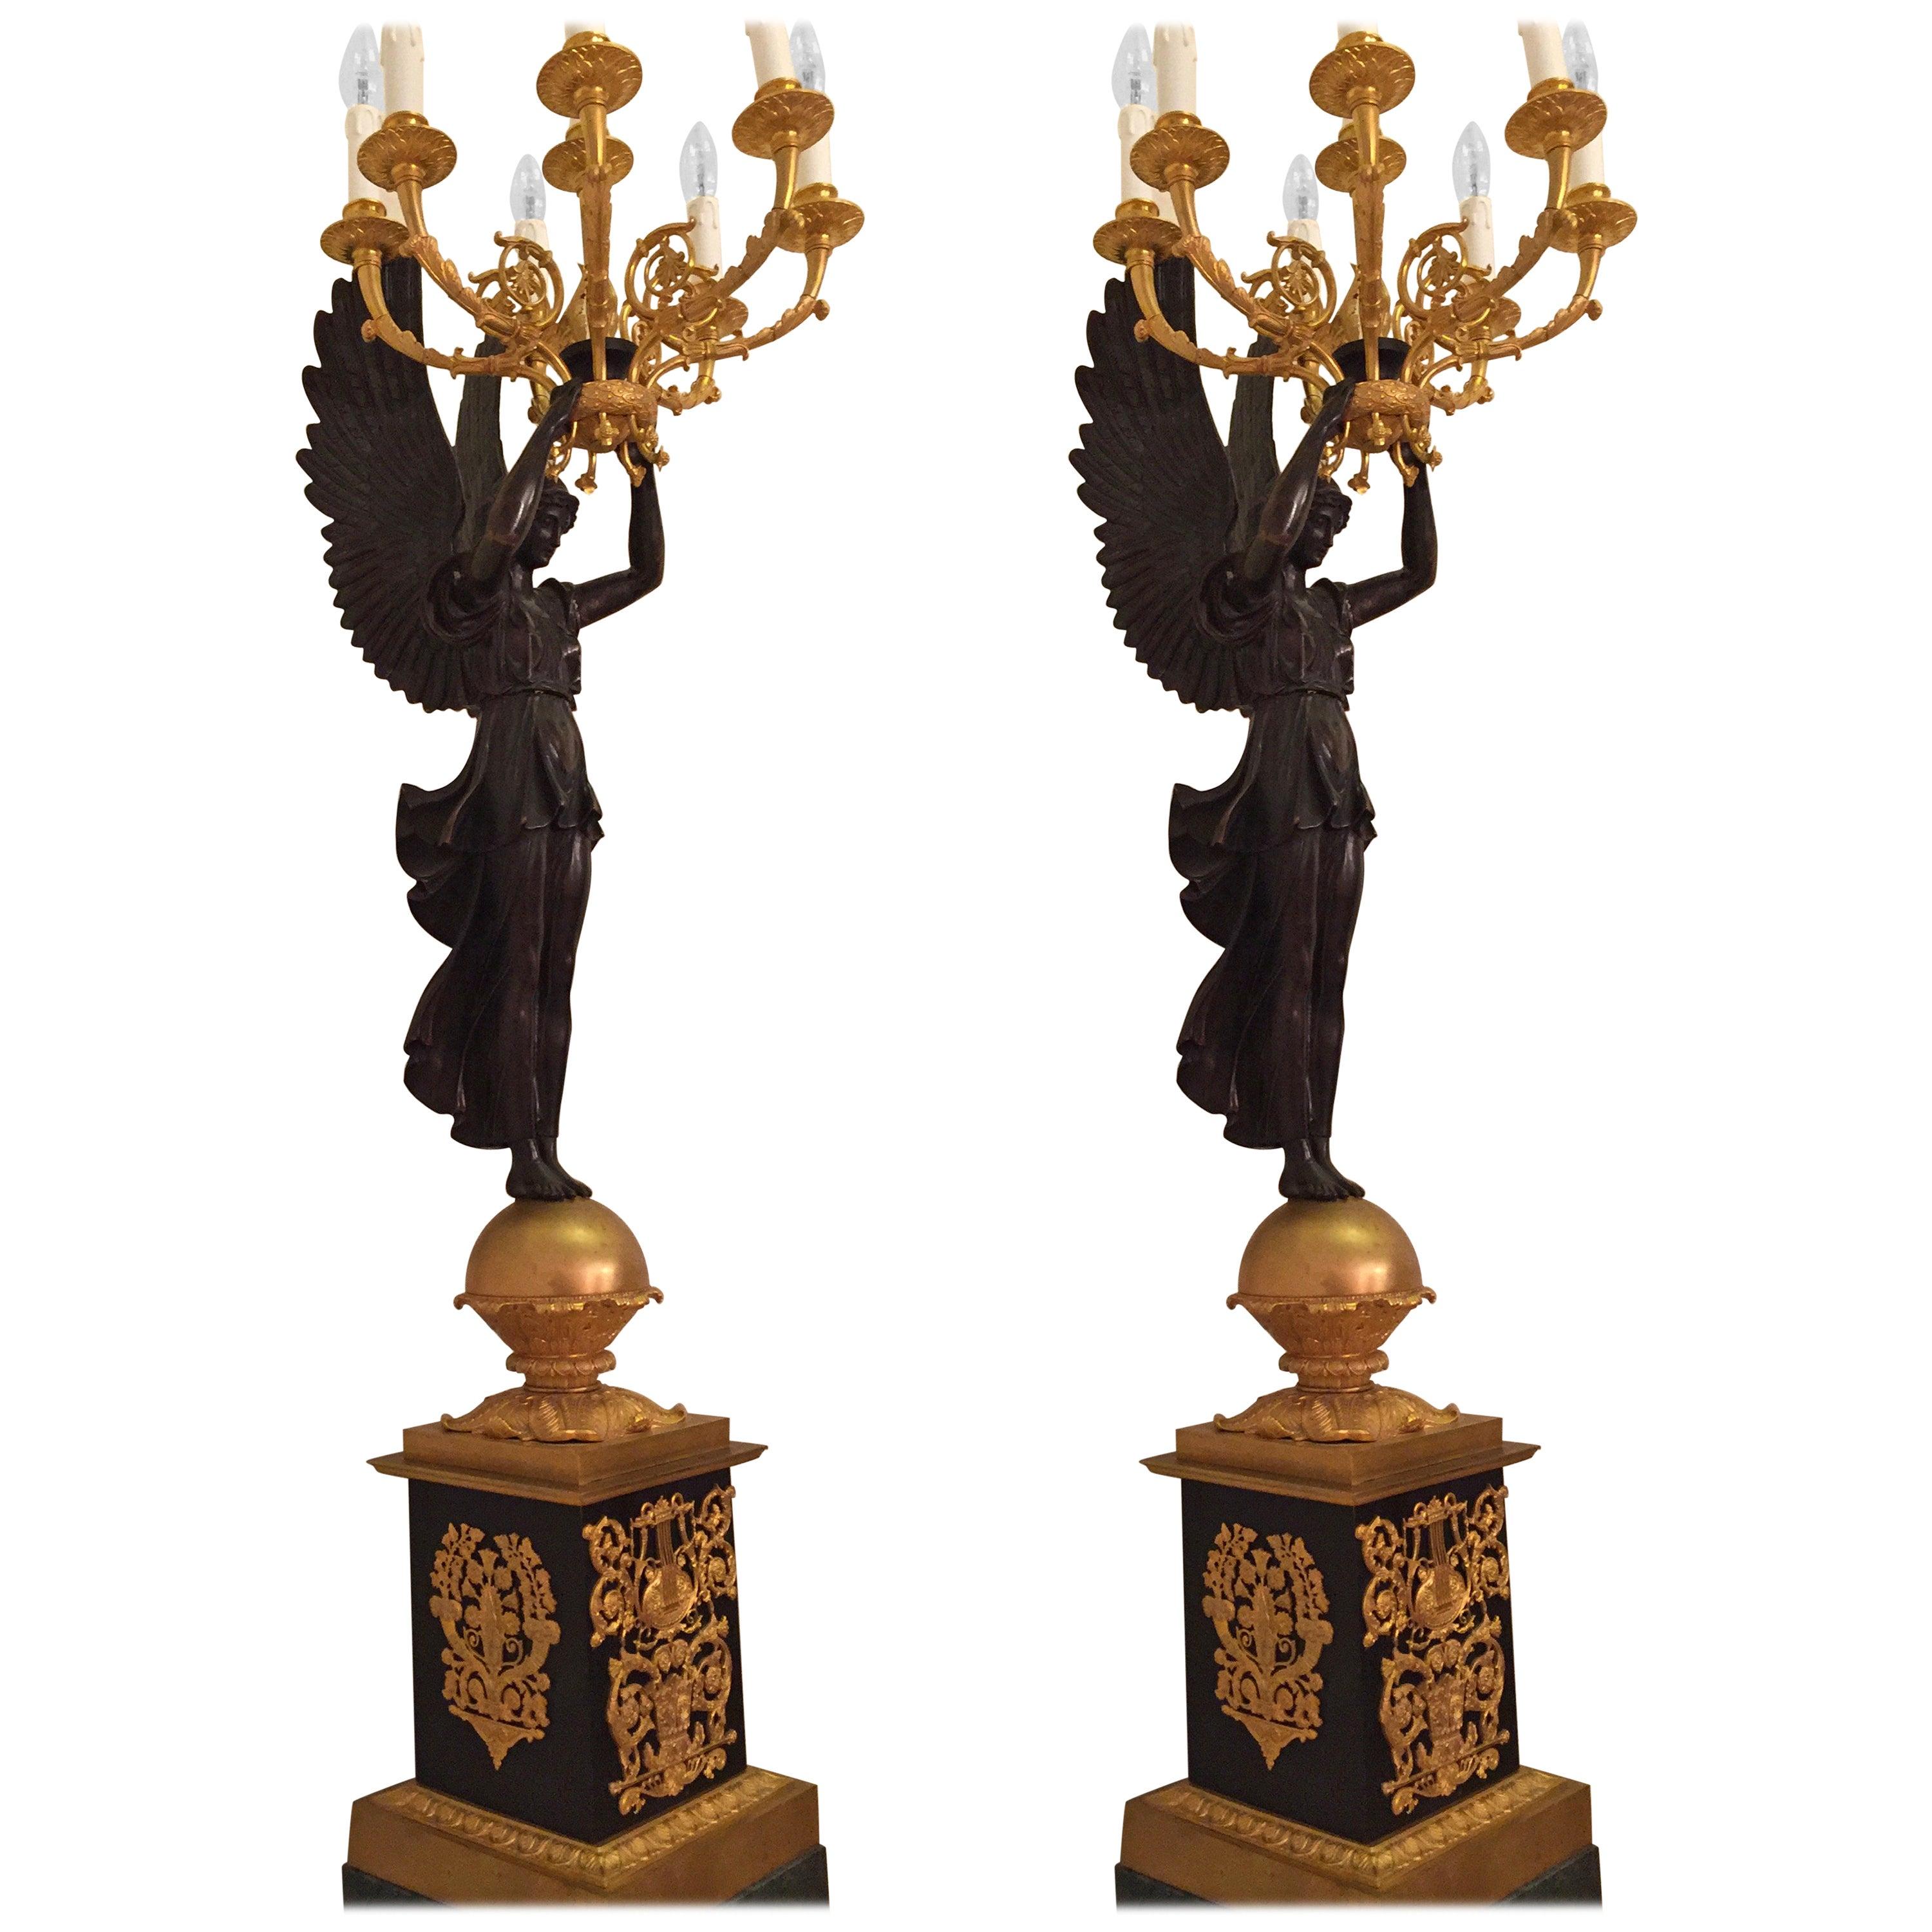 A pair of Princely candelabra.
Exceptionally fine engraved and moulded bronze. Fully moulded
Designed figurines (Victoria). Overhead and hand held torch formed
shaft with 12 fully horn-style sweeping light arms. This model belongs
to the